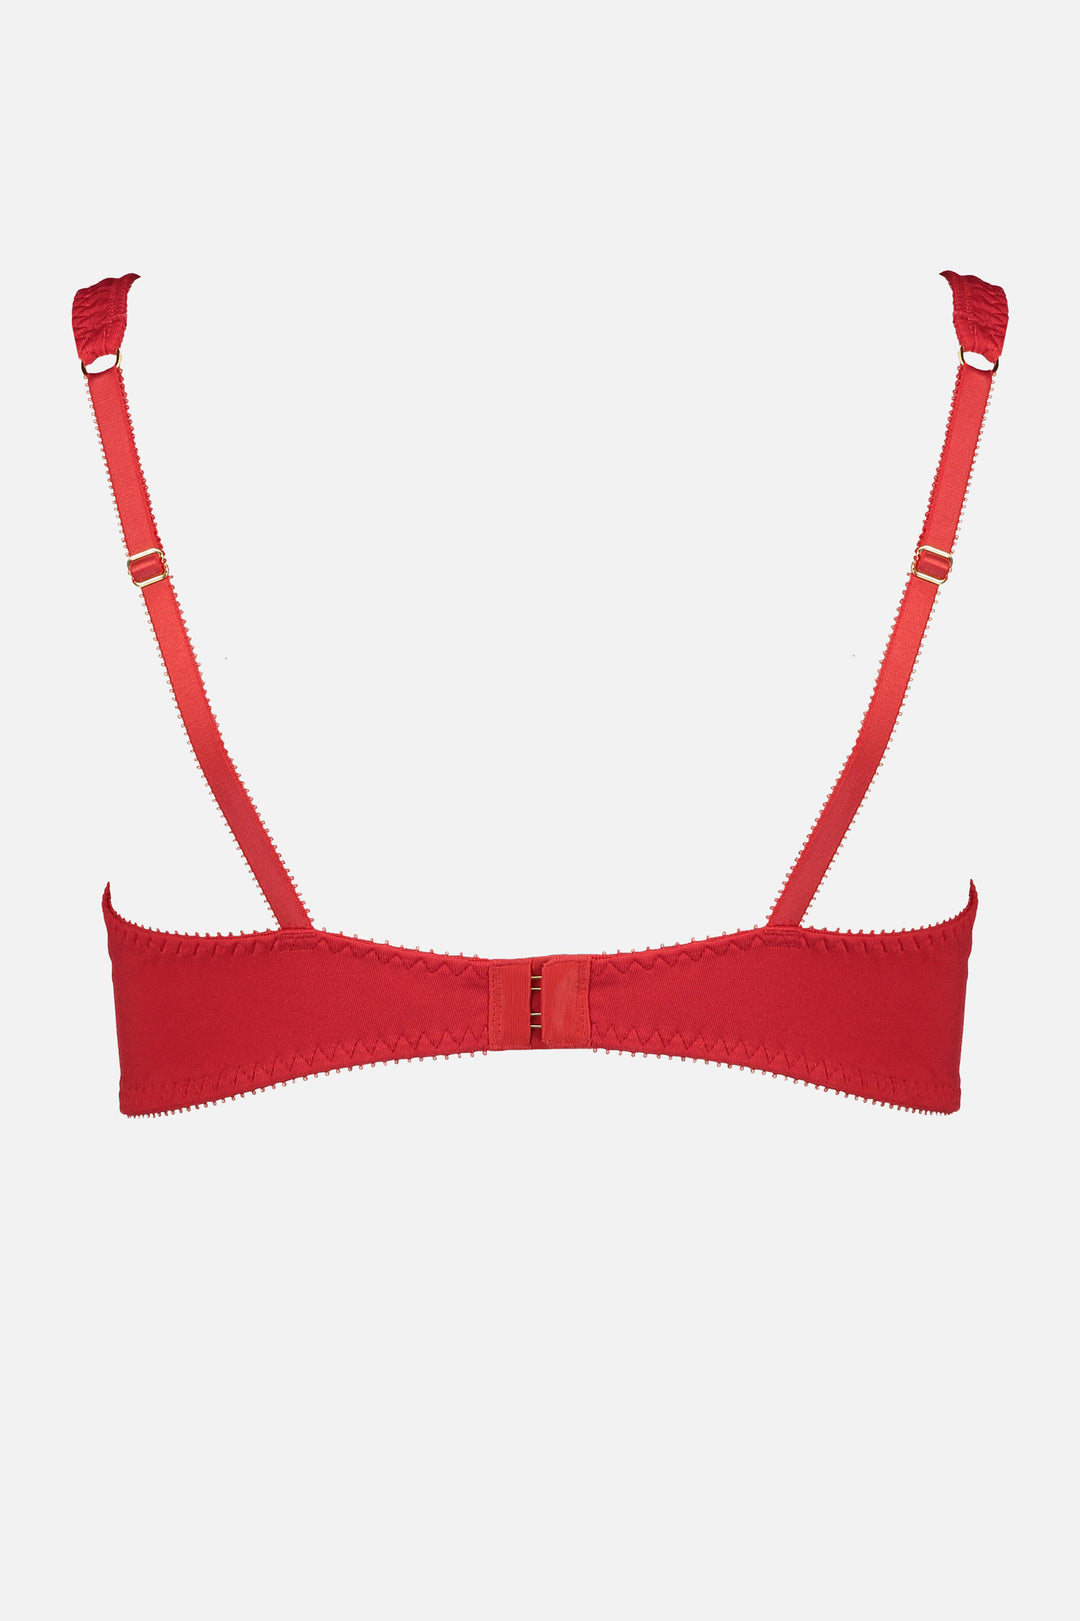 Videris Lingerie Sarah underwire free soft cup bra in red TENCEL™ features adjustable back straps and hook and eyes closure